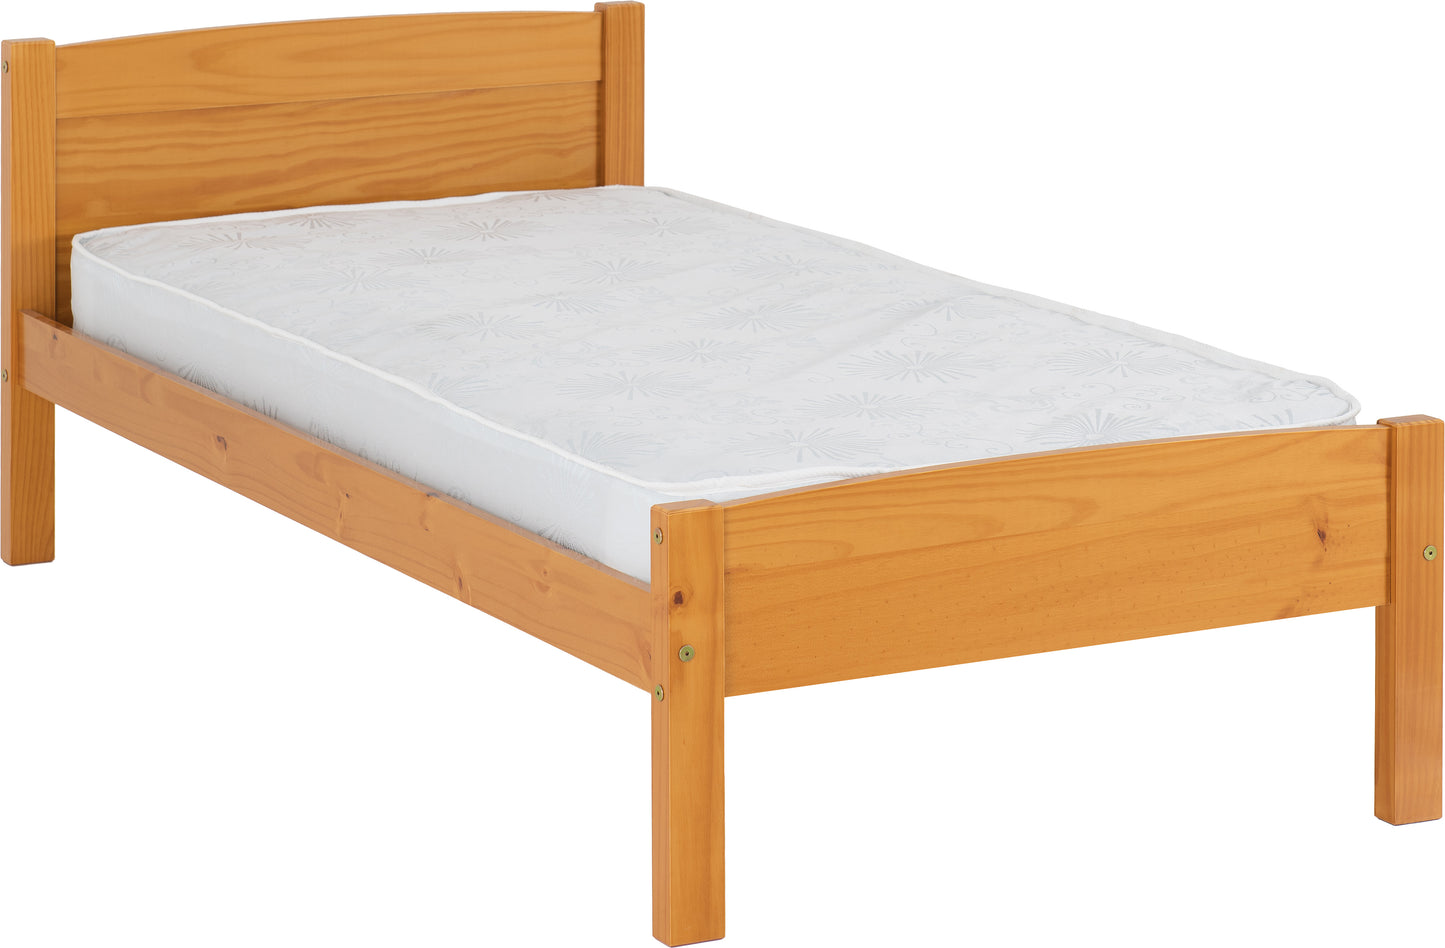 AMBER 3' BED - ANTIQUE PINE